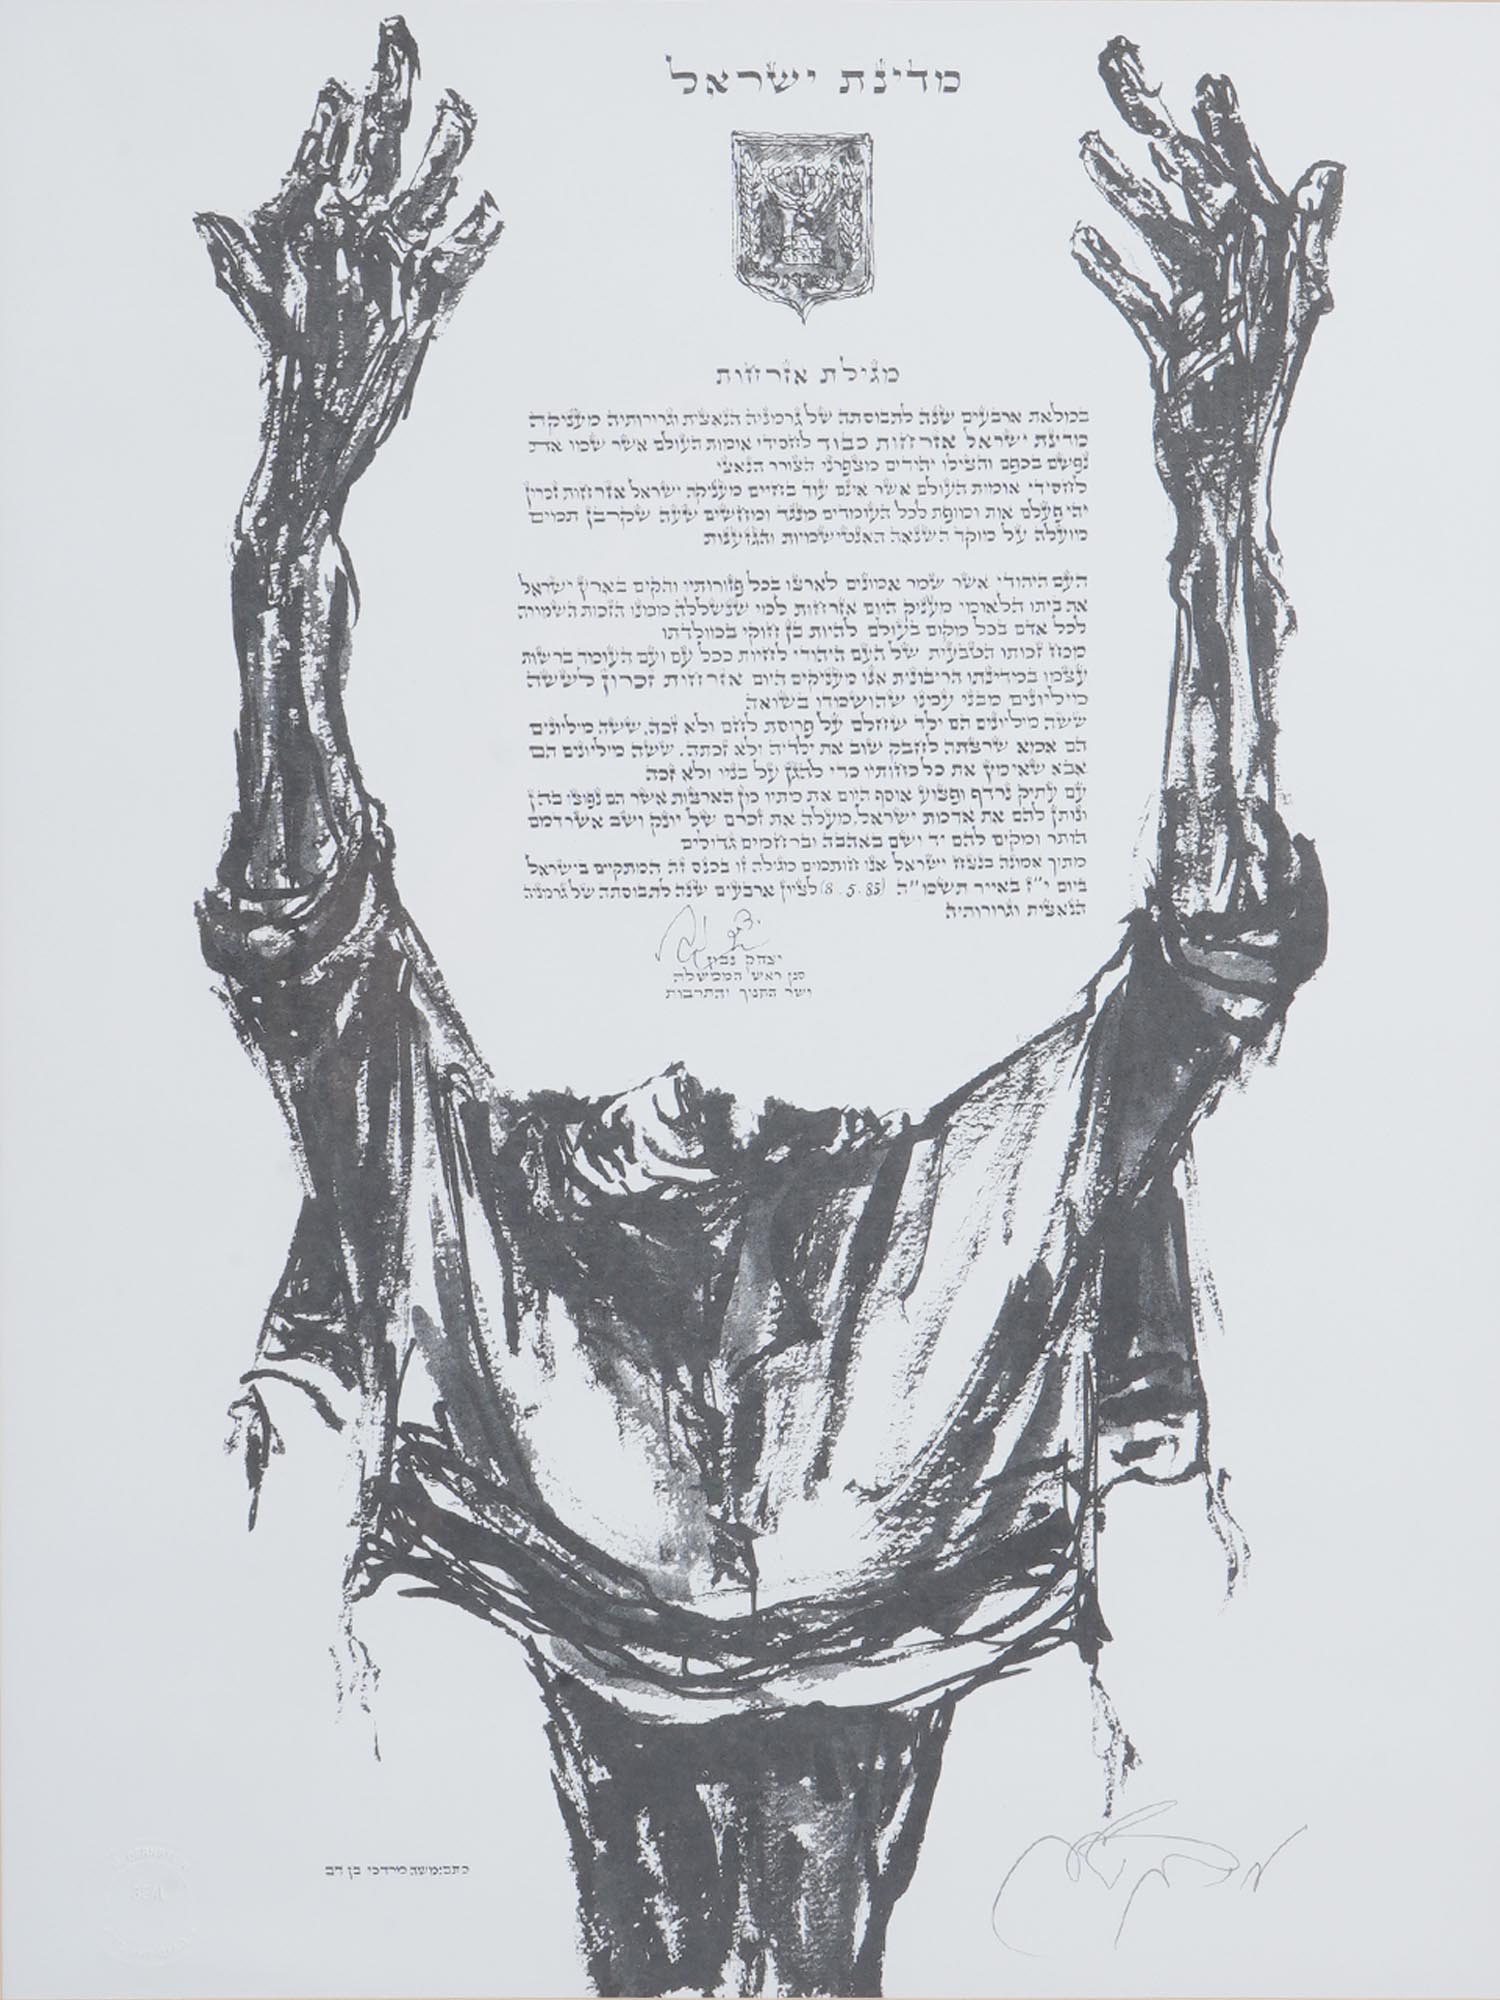 SIGNED JUDAICA LITHOGRAPH PRINT BY MOSHE BERNSTEIN PIC-1